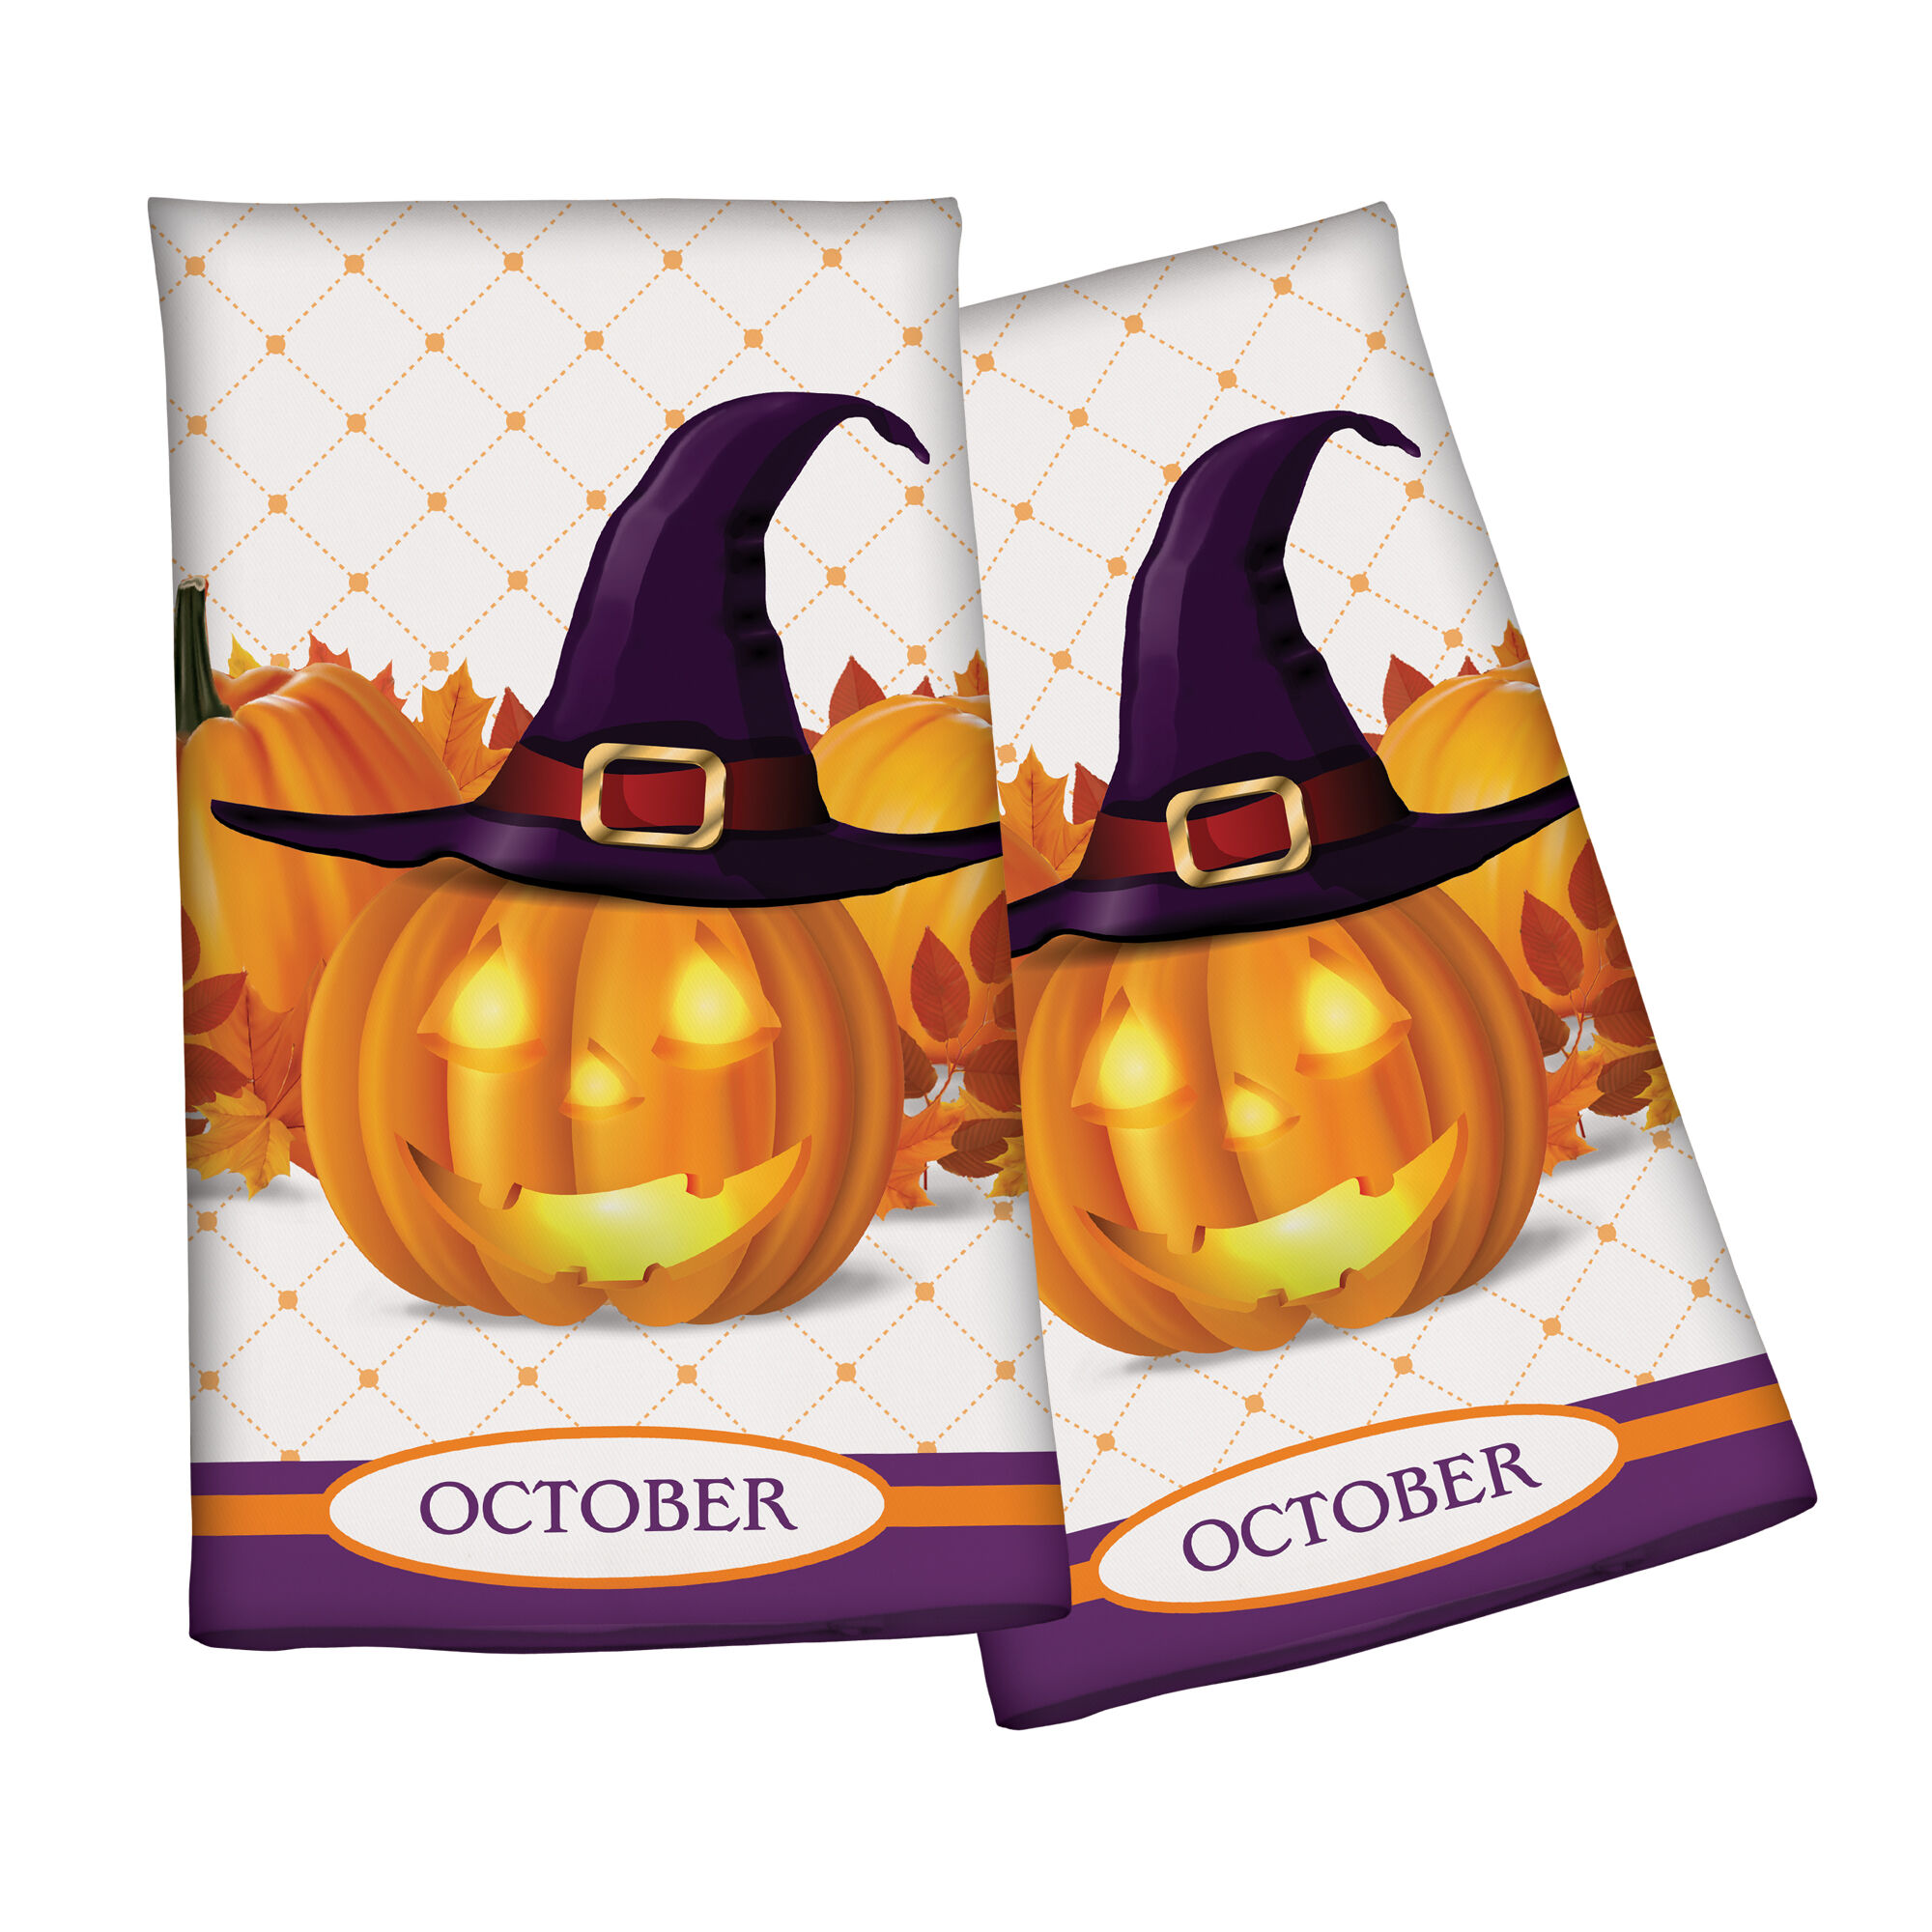 Year of Cheer Kitchen Towel Collection 6844 0015 f october